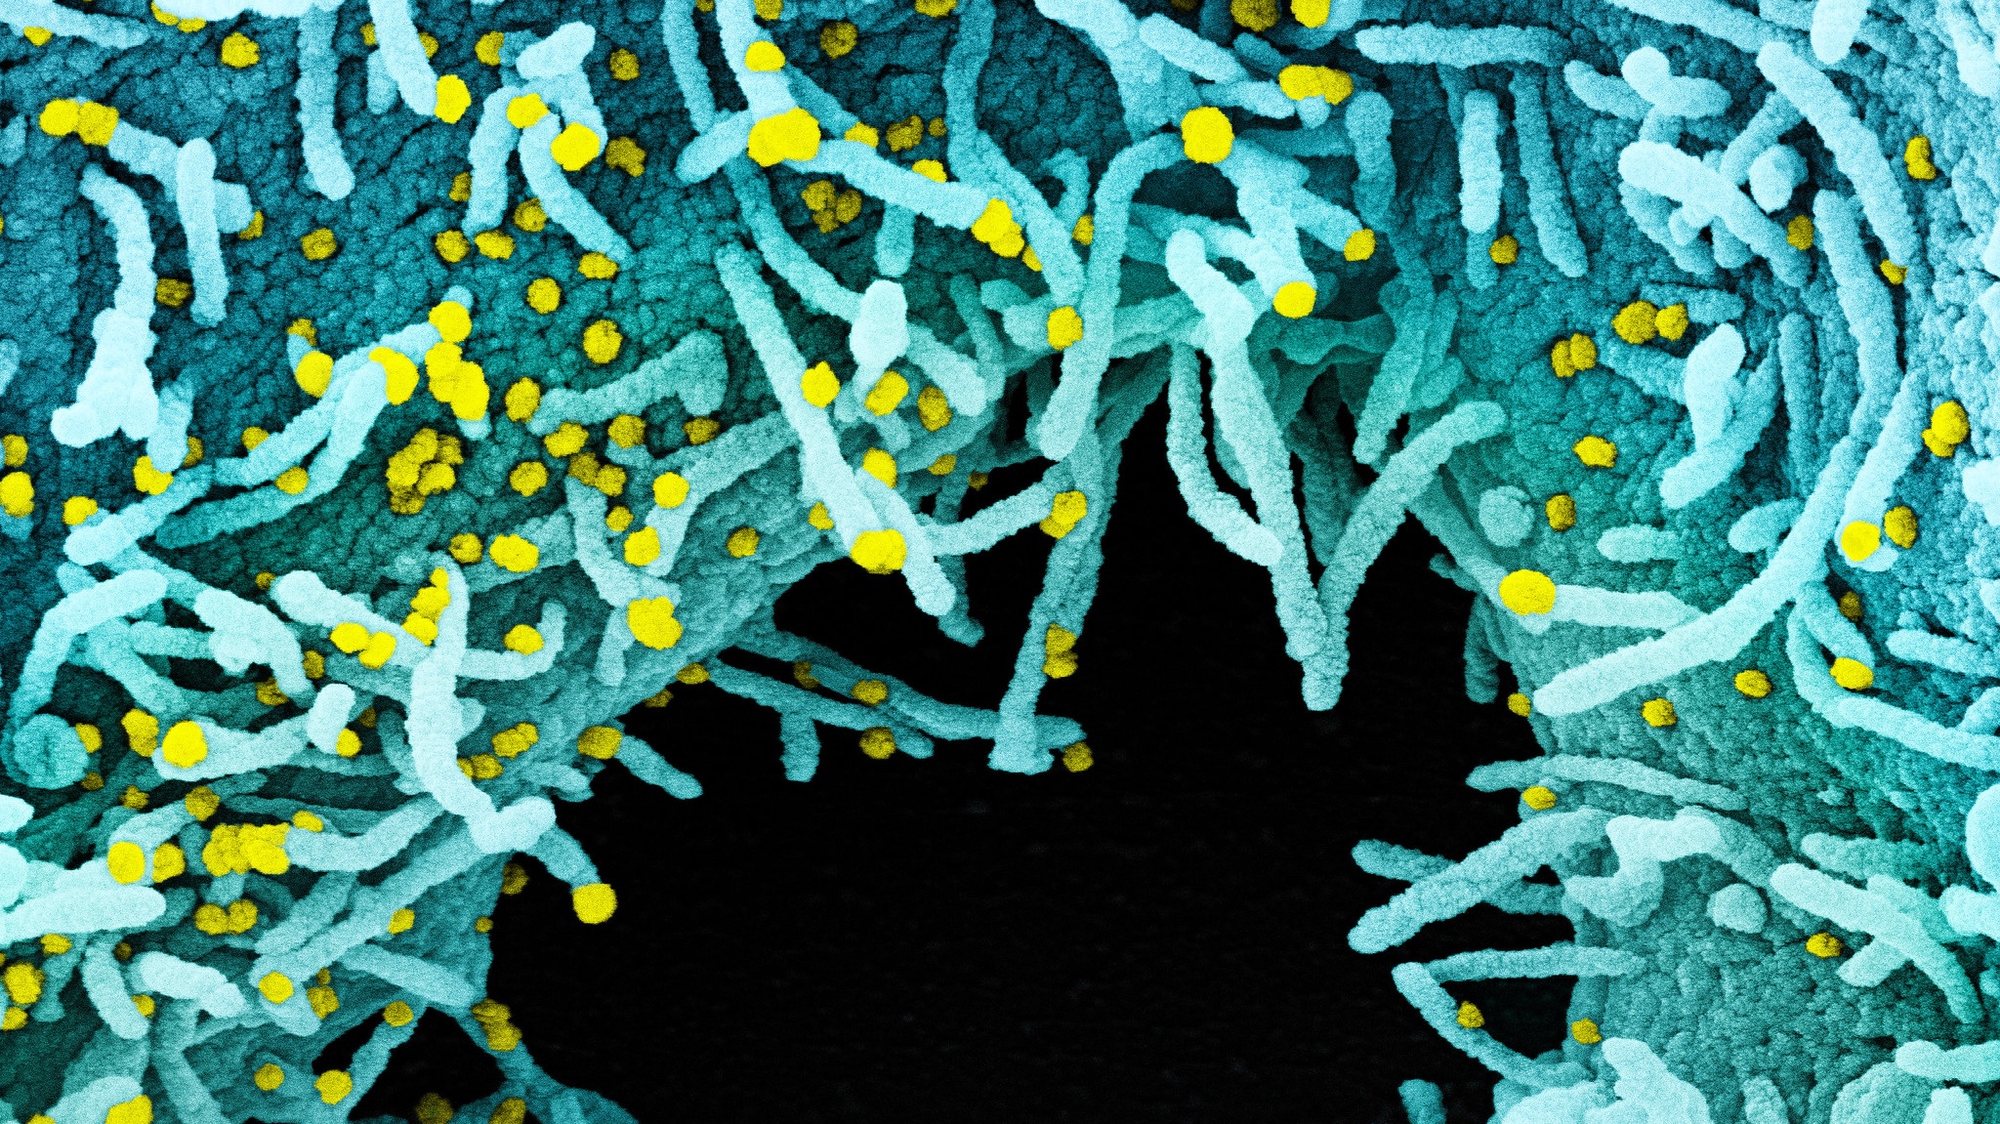 epa08546705 An undated handout image captured and color-enhanced at the National Institute of Allergy and Infectious Diseases (NIAID) Integrated Research Facility (IRF) in Fort Detrick, Maryland, USA and made available by the National Institutes of Health (NIH) shows a colorized scanning electron micrograph of a cell heavily infected with SARS-CoV-2 virus particles (yellow), isolated from a patient sample (issued 15 July 2020). The black area in the image is extracellular space between the cells. The novel coronavirus SARS-COV-2, which causes the COVID-19 disease, has been recognized as a pandemic by the World Health Organization (WHO) on 11 March 2020.  EPA/NIAID/NATIONAL INSTITUTES OF HEALTH HANDOUT  HANDOUT EDITORIAL USE ONLY/NO SALES *** Local Caption *** 56102666